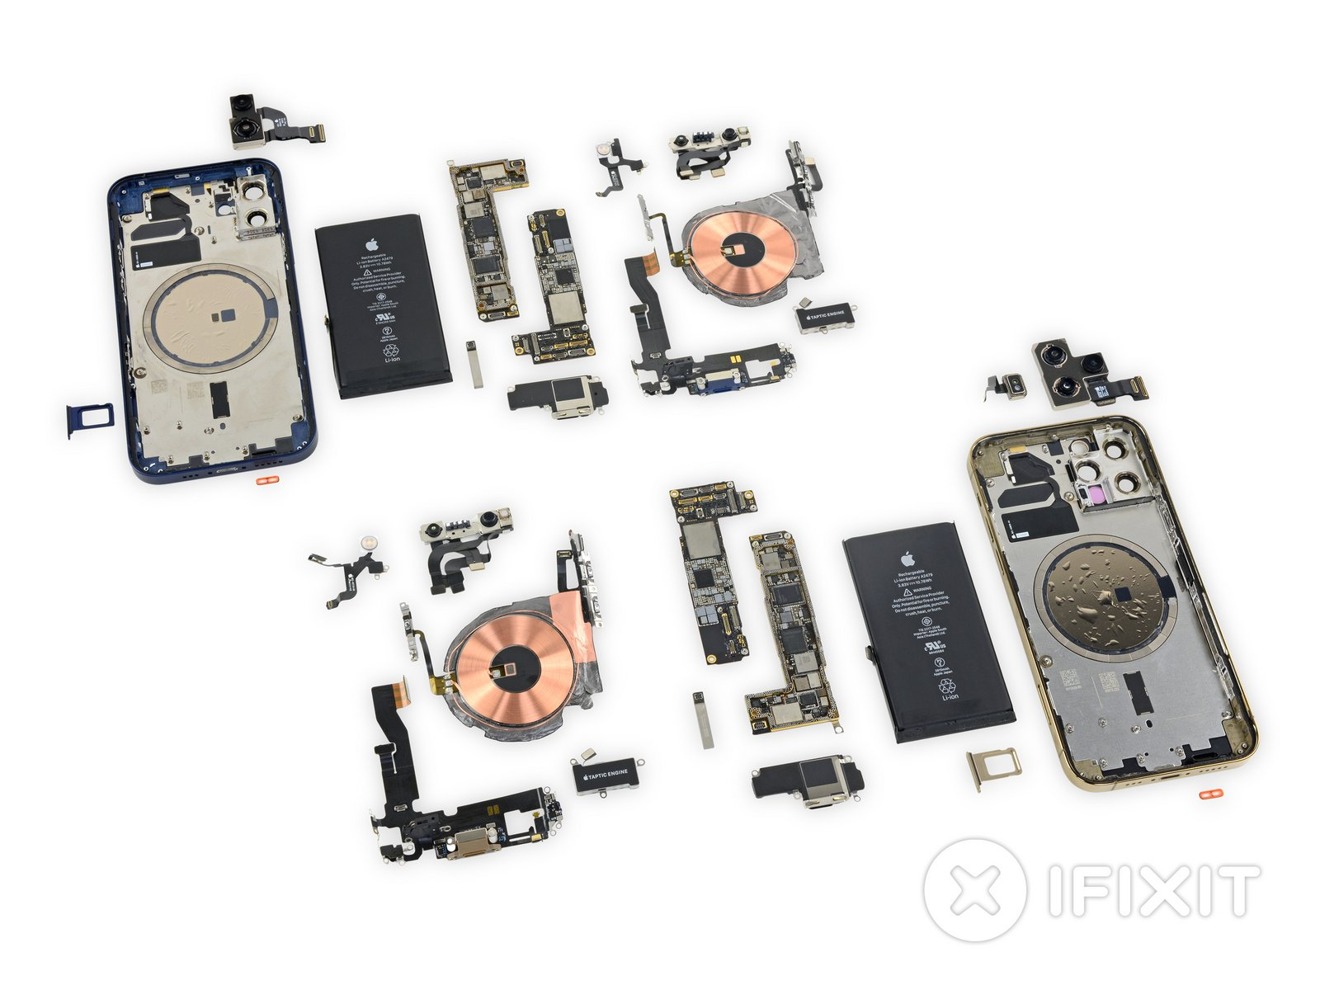 A side-by-side component view of the iPhone 12 and iPhone 12 Pro [via iFixit]